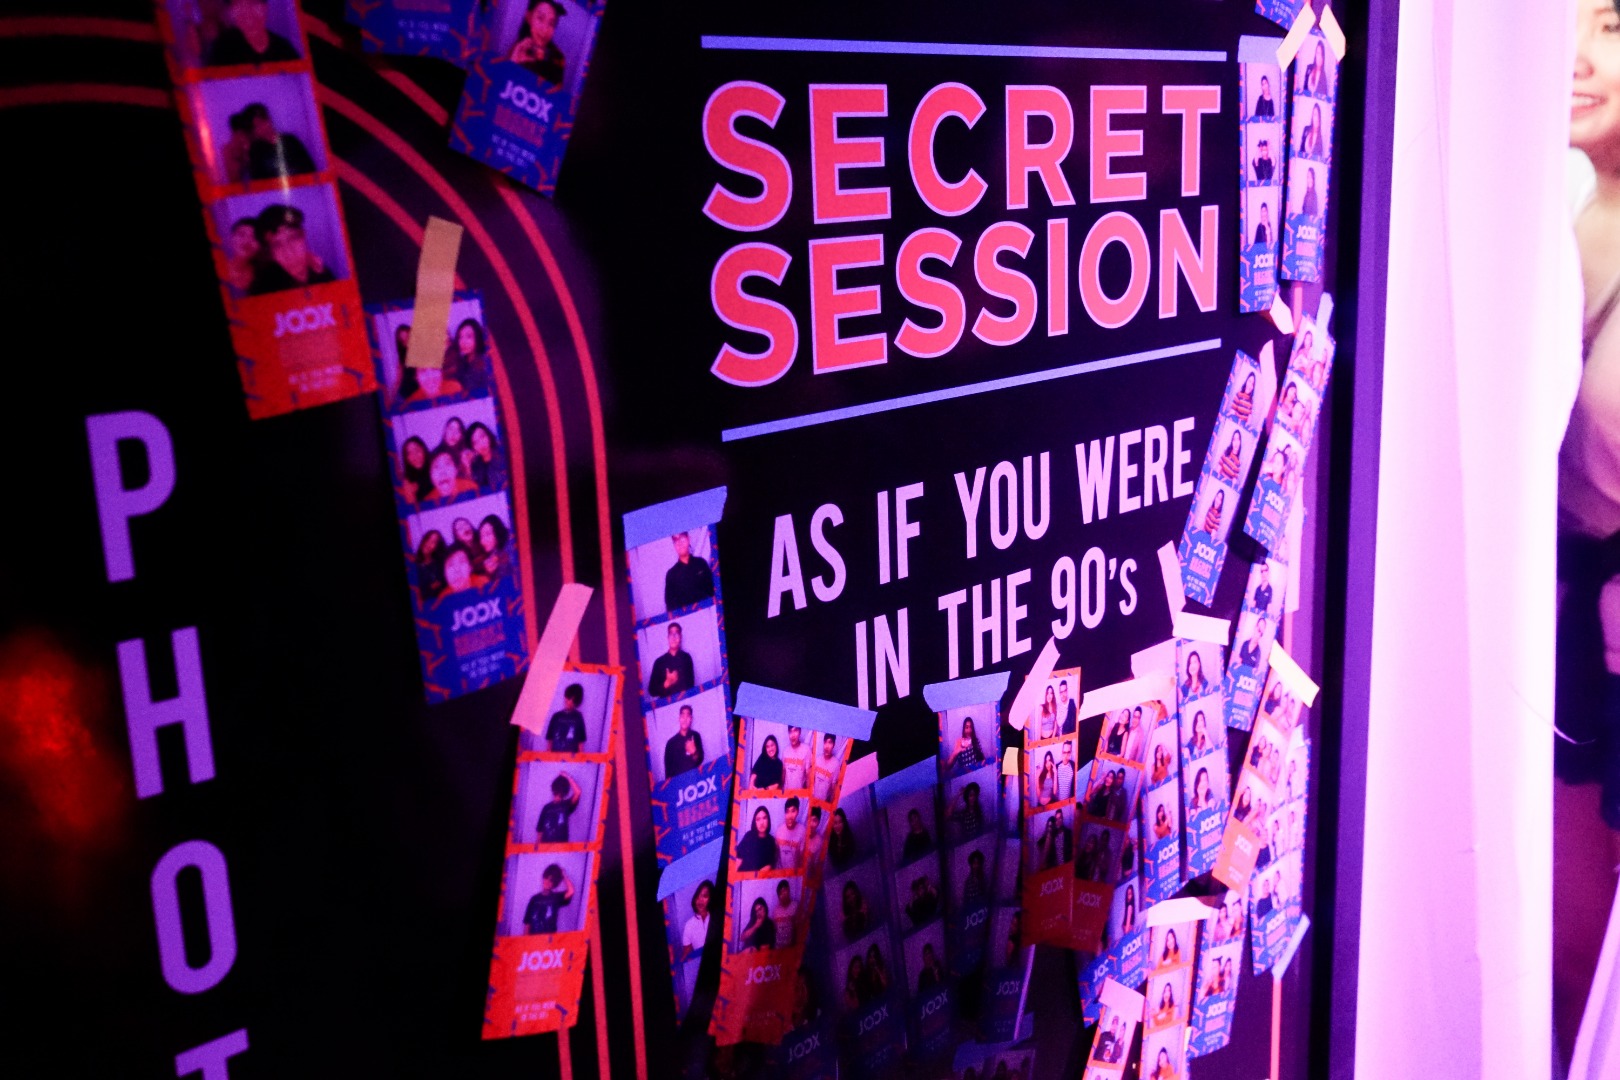 JOOX Secret Session : As If You Were in The 90’s